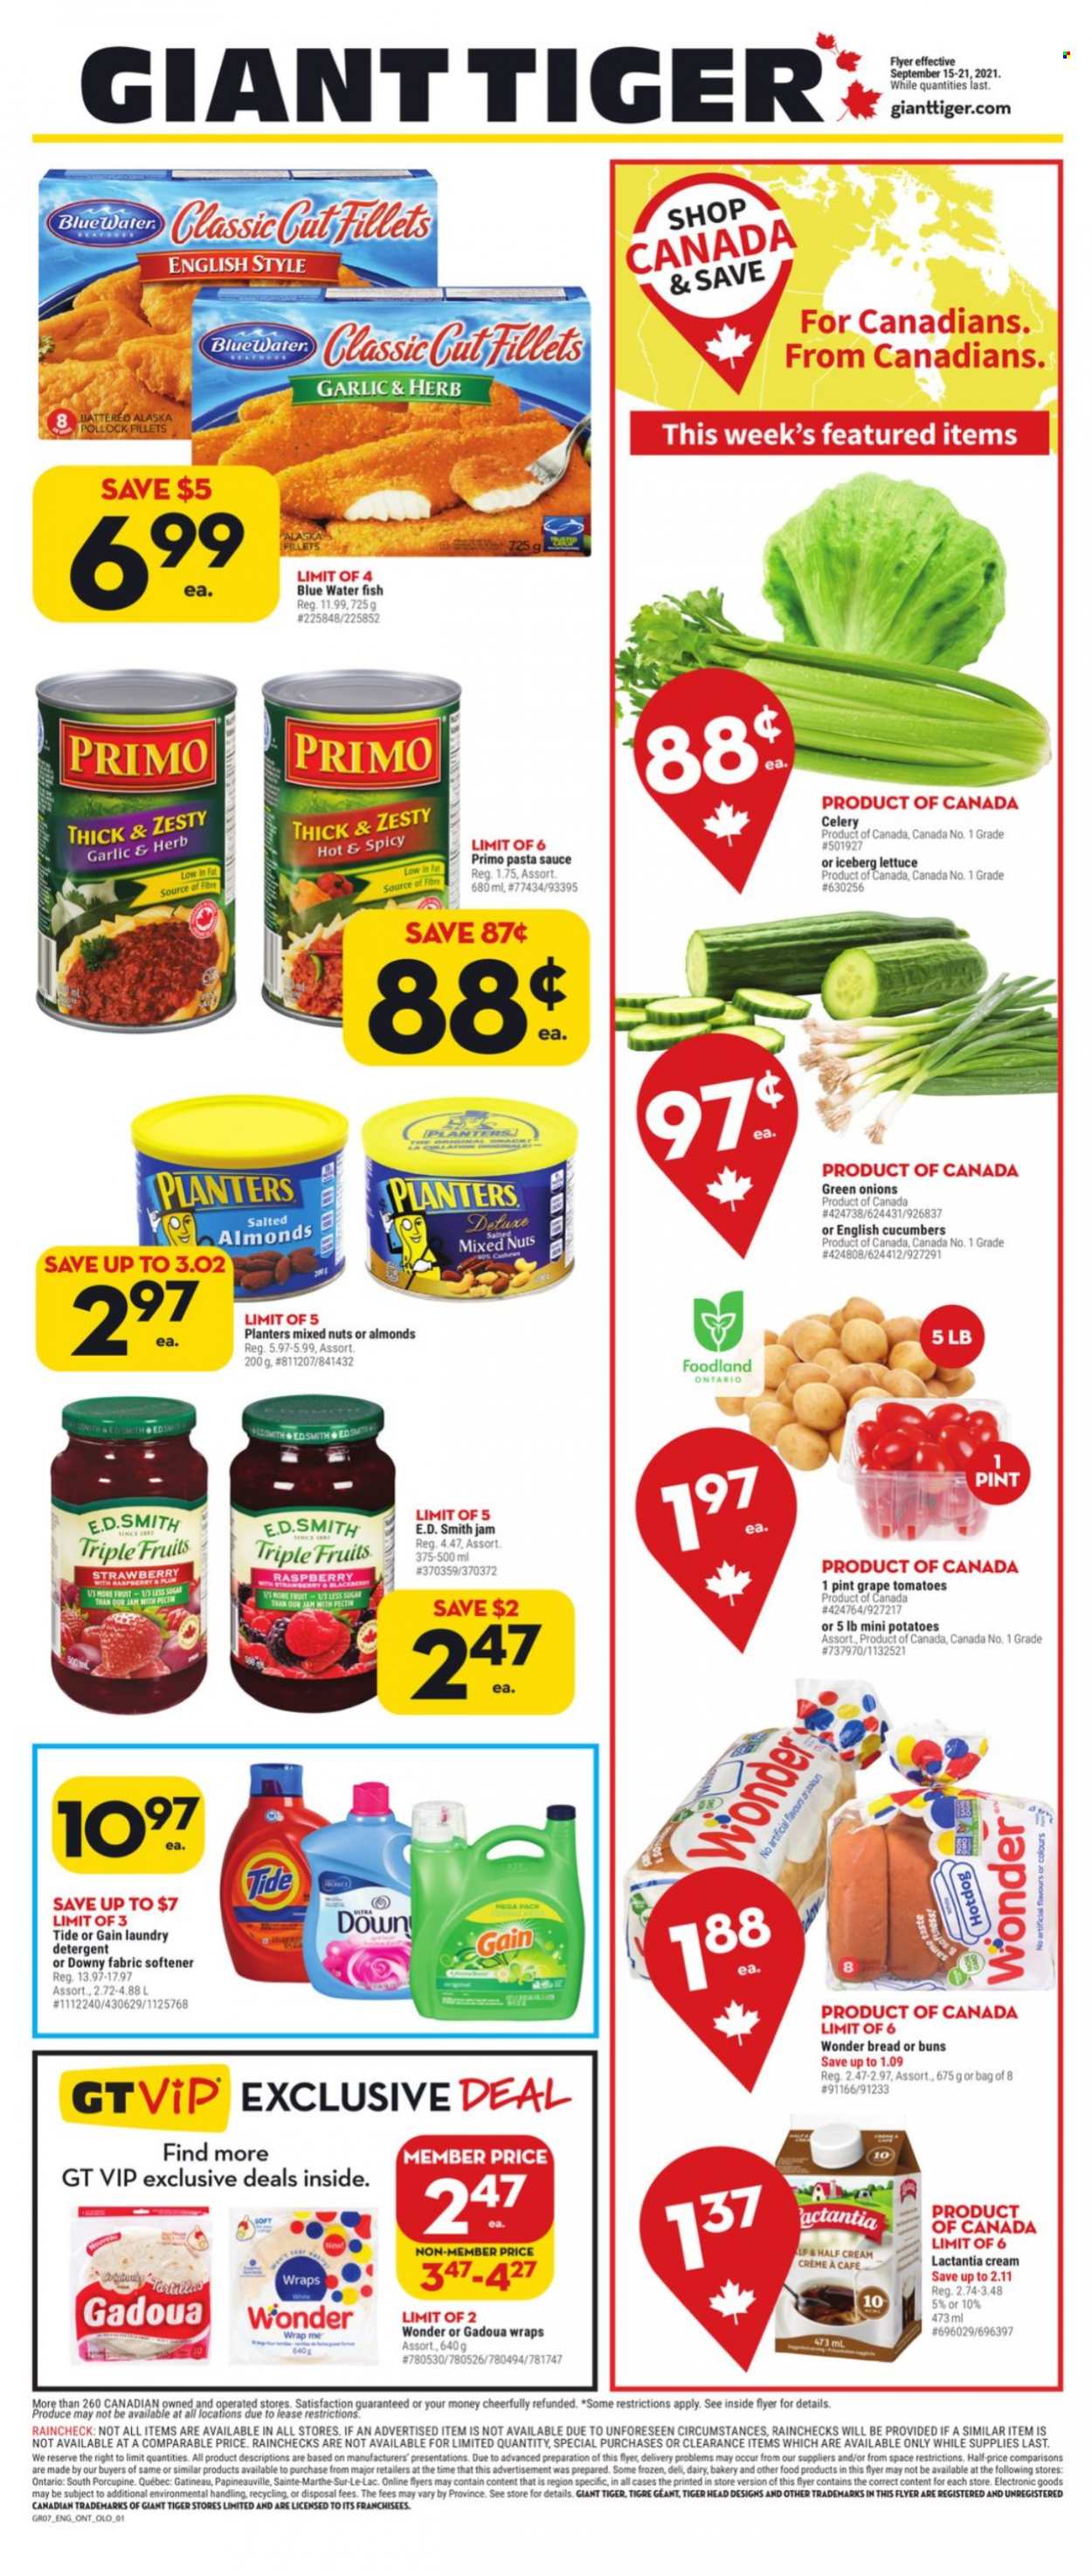 thumbnail - Giant Tiger Flyer - September 15, 2021 - September 21, 2021 - Sales products - bread, buns, wraps, celery, cucumber, tomatoes, potatoes, lettuce, green onion, pollock, fish, pasta sauce, sauce, fruit jam, almonds, mixed nuts, Planters, Gain, Tide, fabric softener, laundry detergent, Downy Laundry, detergent. Page 1.